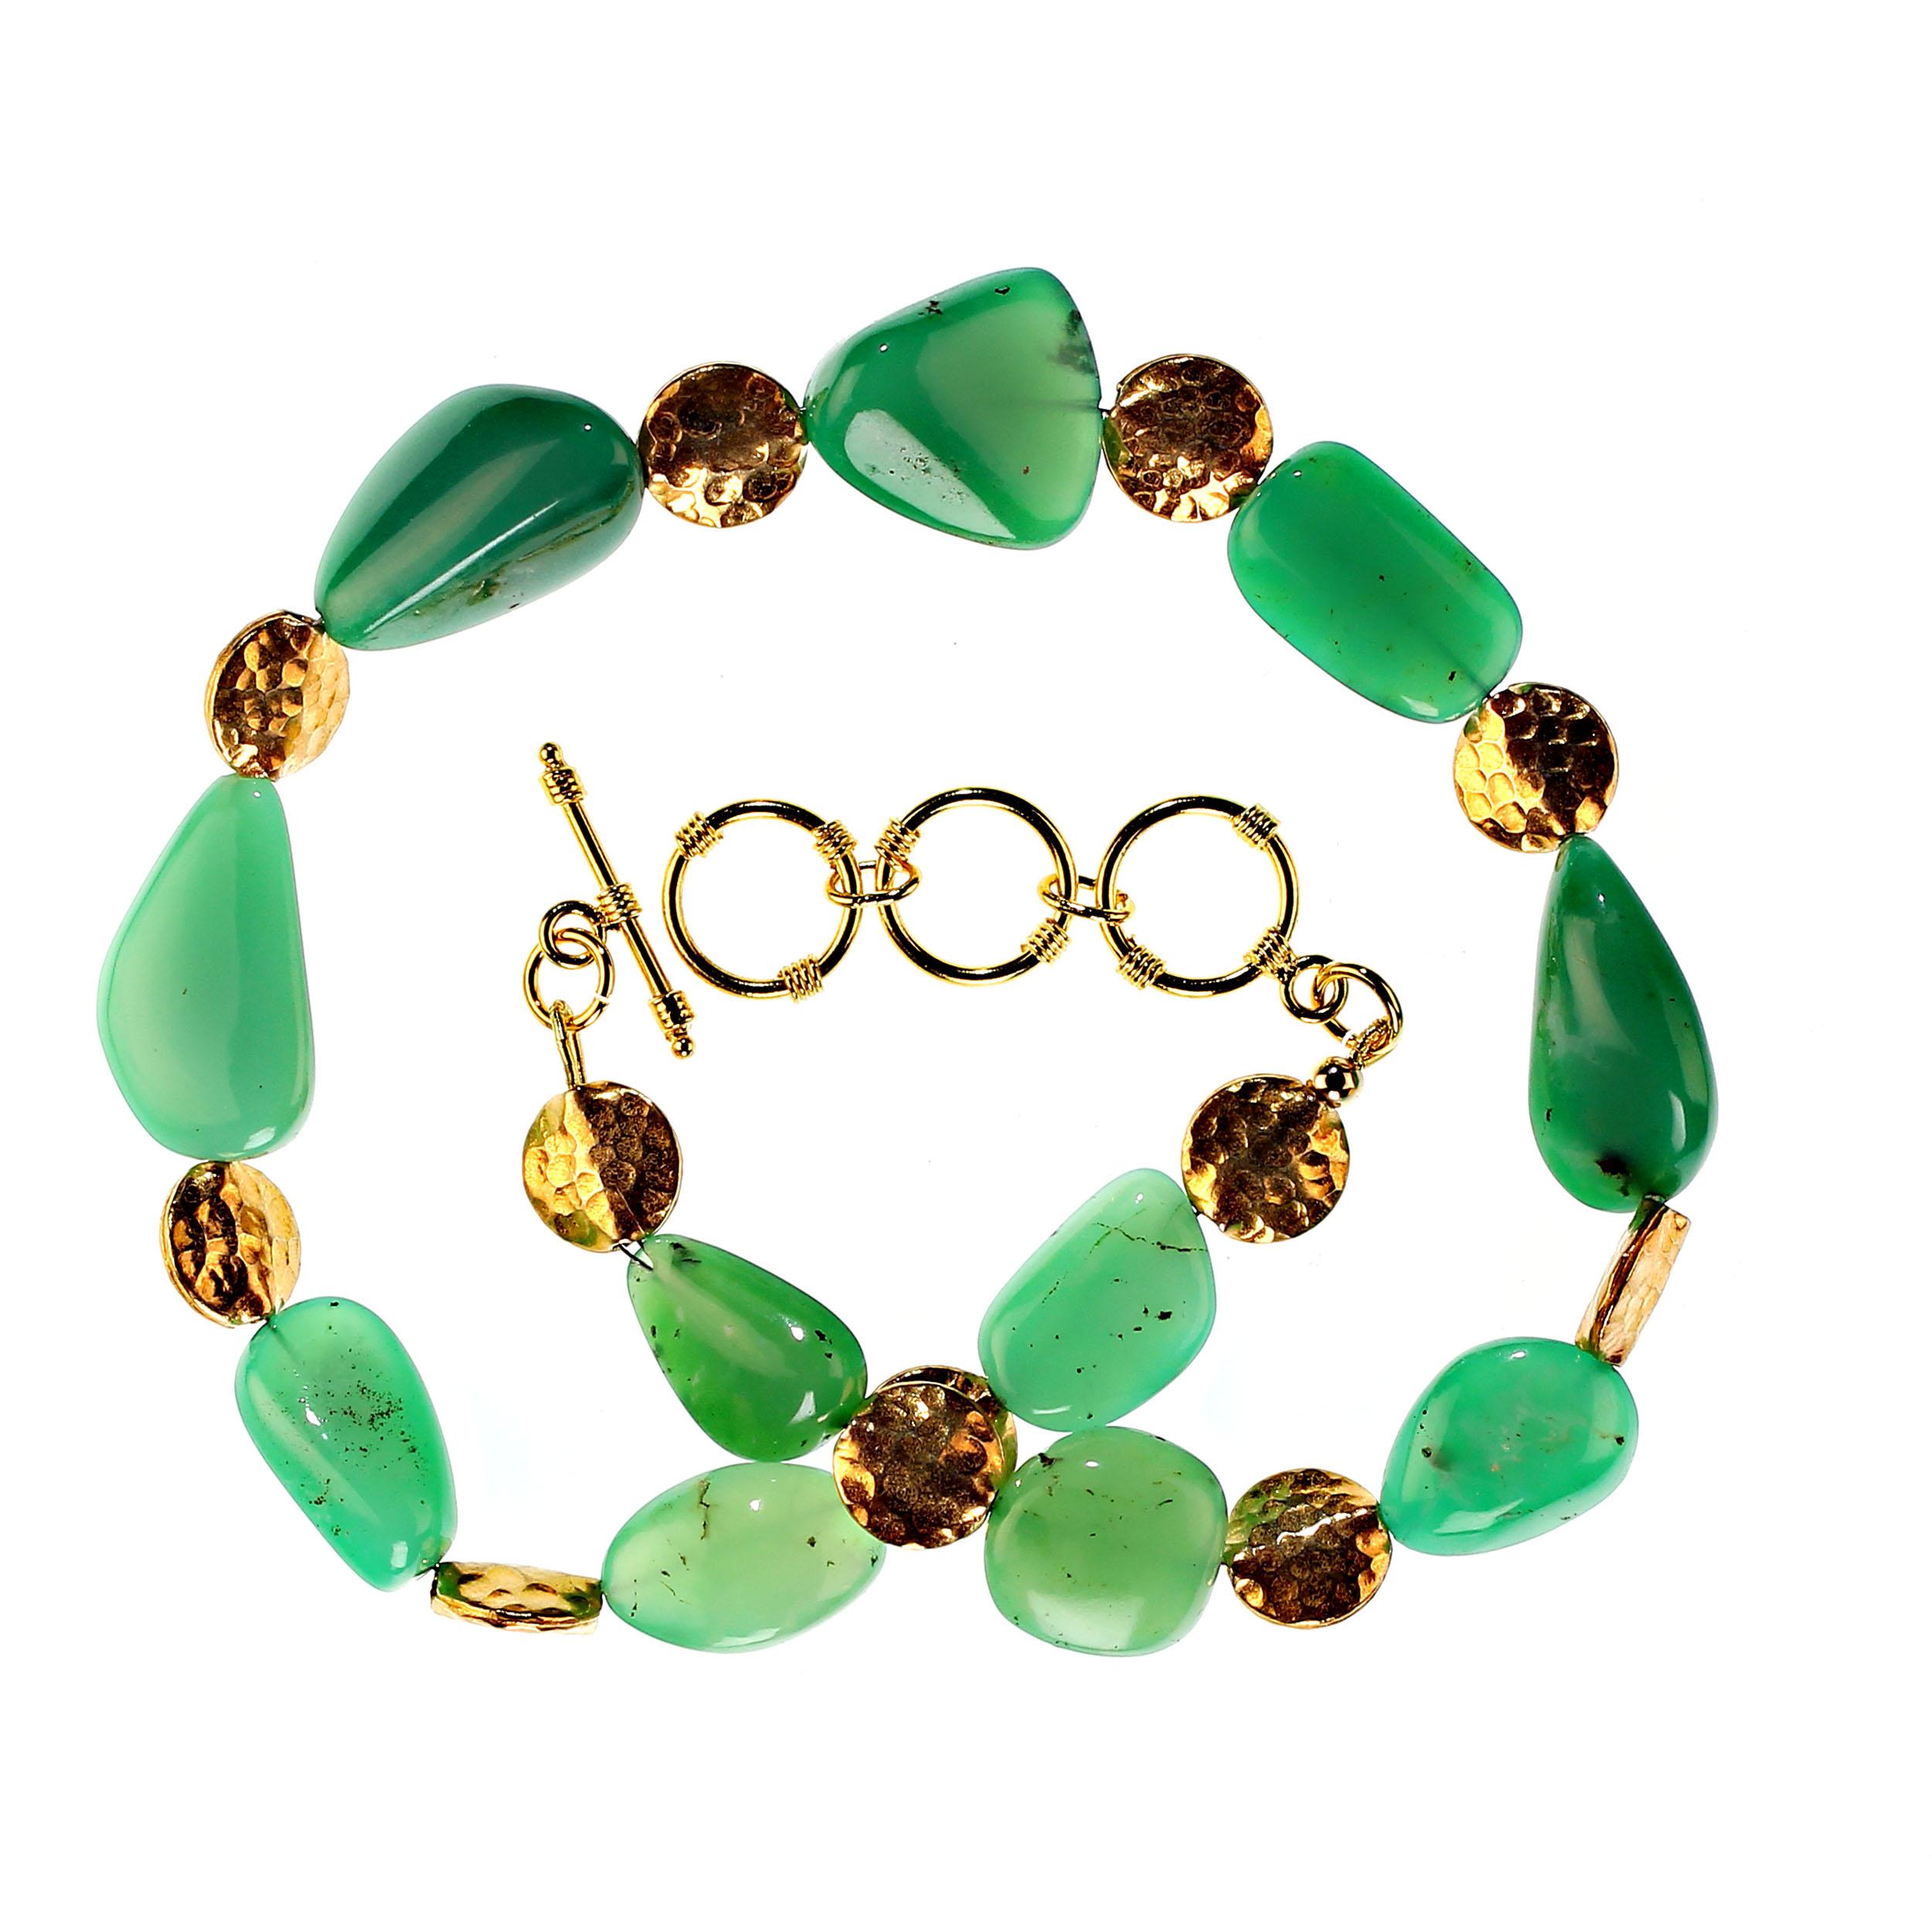 Bead AJD 18 Inch Magnificent Chrysoprase Nugget Necklace with goldy accents For Sale